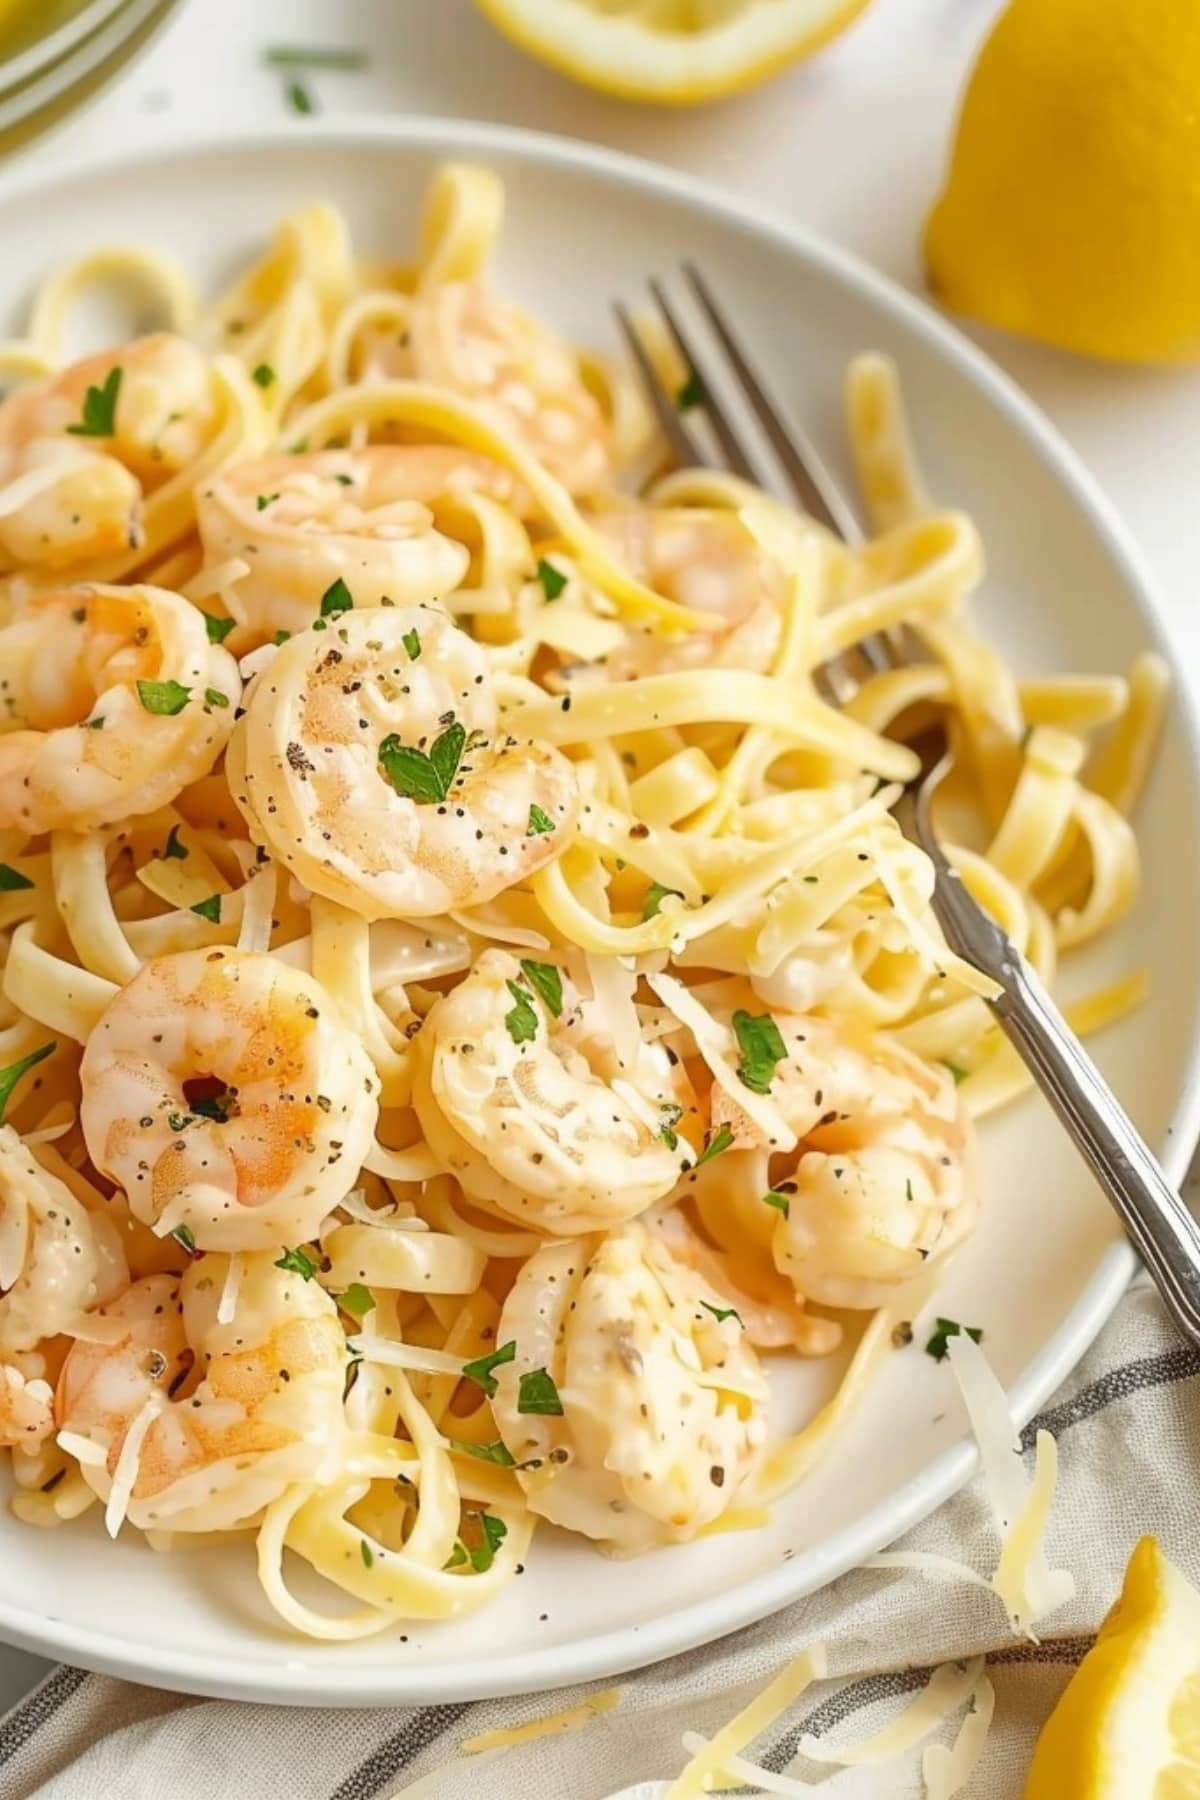 Pasta with lemon sauce and shrimp on a white plate.